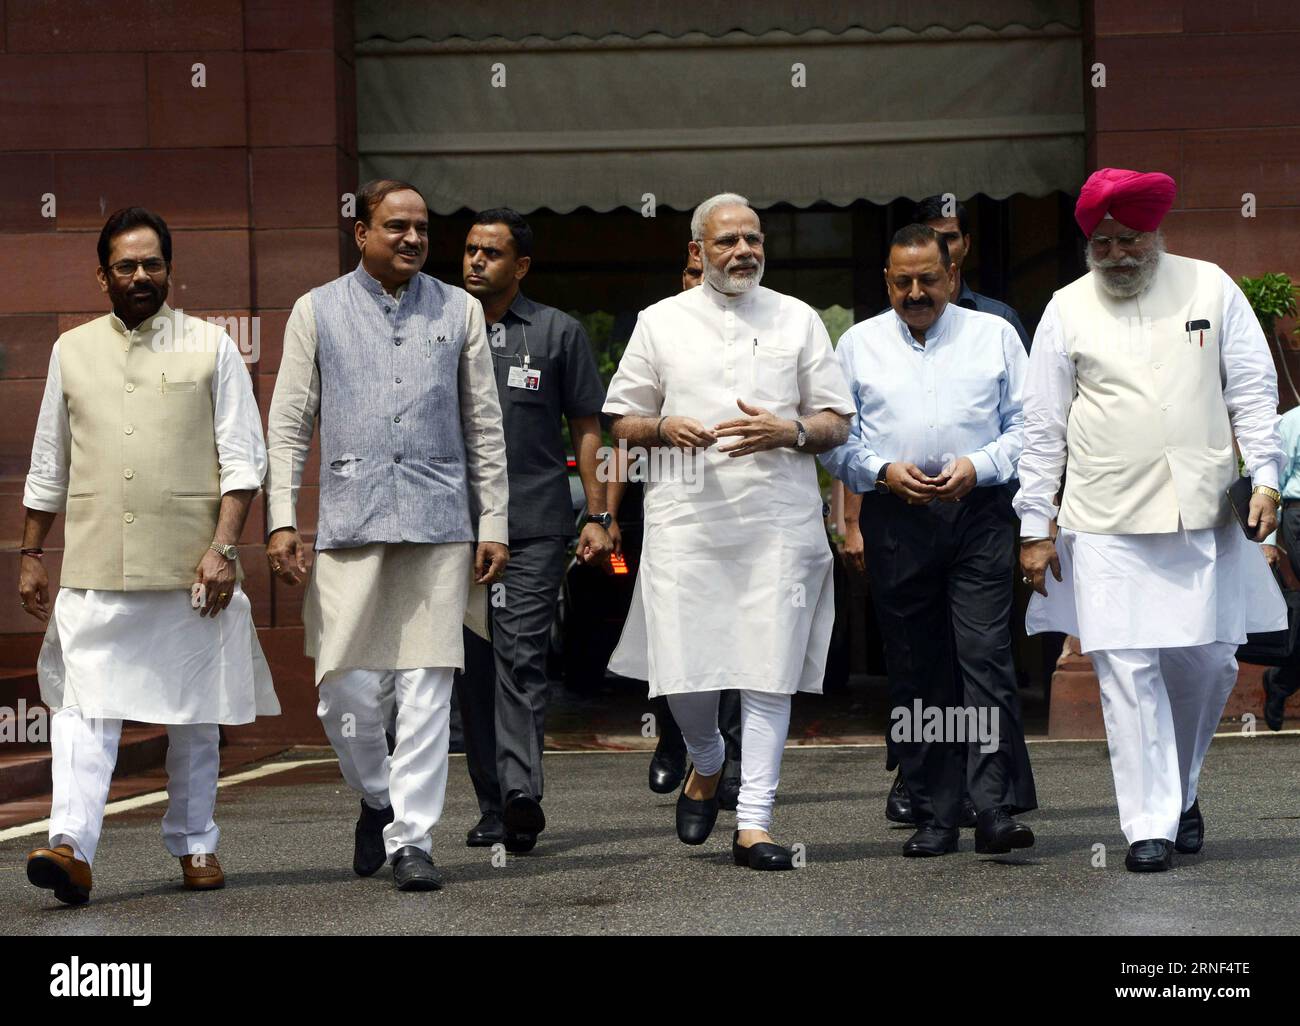 (160718) -- NEW DELHI, July 18, 2016 -- Indian Prime Minister Narendra Modi (C, front) arrives at Parliament House with his cabinet colleagues on the first day of monsoon session in New Delhi, India, July 18, 2016. The monsoon session of Indian lower house began on Monday but was adjourned shortly to Tuesday due to the death of Madhya Pradesh MP Dalpat Singh Paraste. ) (sxk) INDIA-NEW DELHI-MONSOON SESSION-PM-MODI Stringer PUBLICATIONxNOTxINxCHN   160718 New Delhi July 18 2016 Indian Prime Ministers Narendra Modes C Front arrives AT Parliament House With His Cabinet colleagues ON The First Day Stock Photo